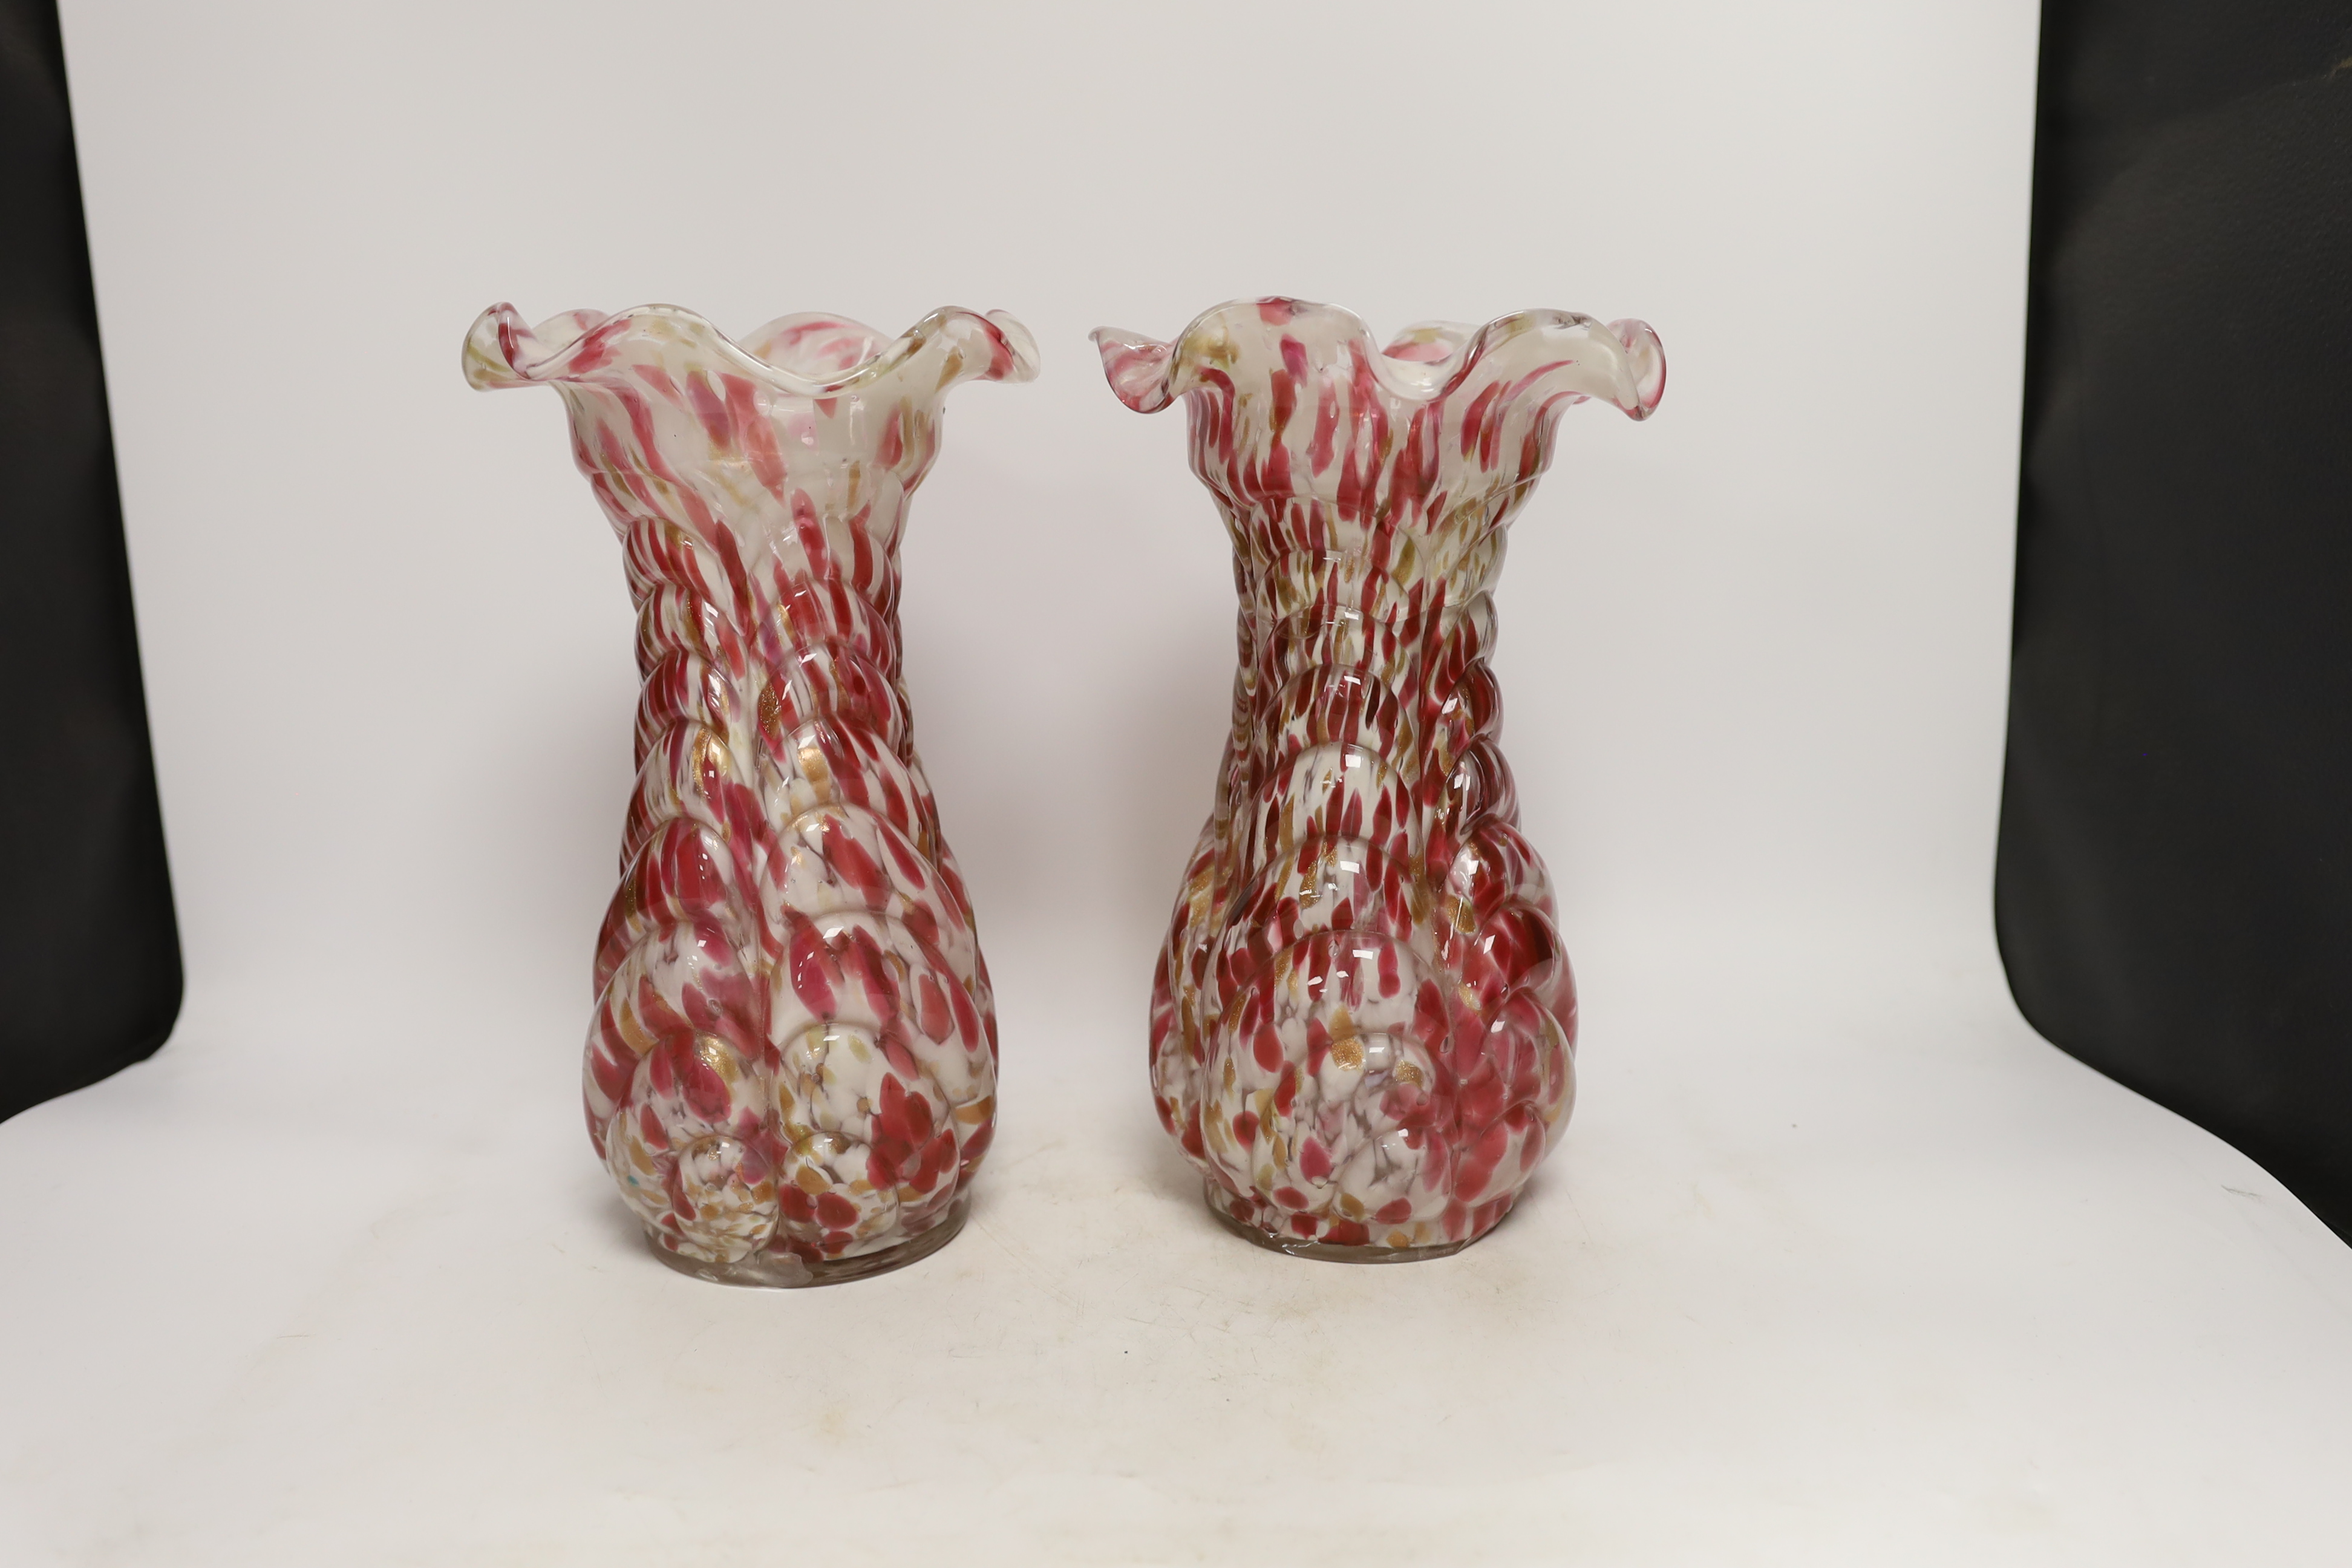 A pair of French red and white glass vases, marked Depose, 29cm high